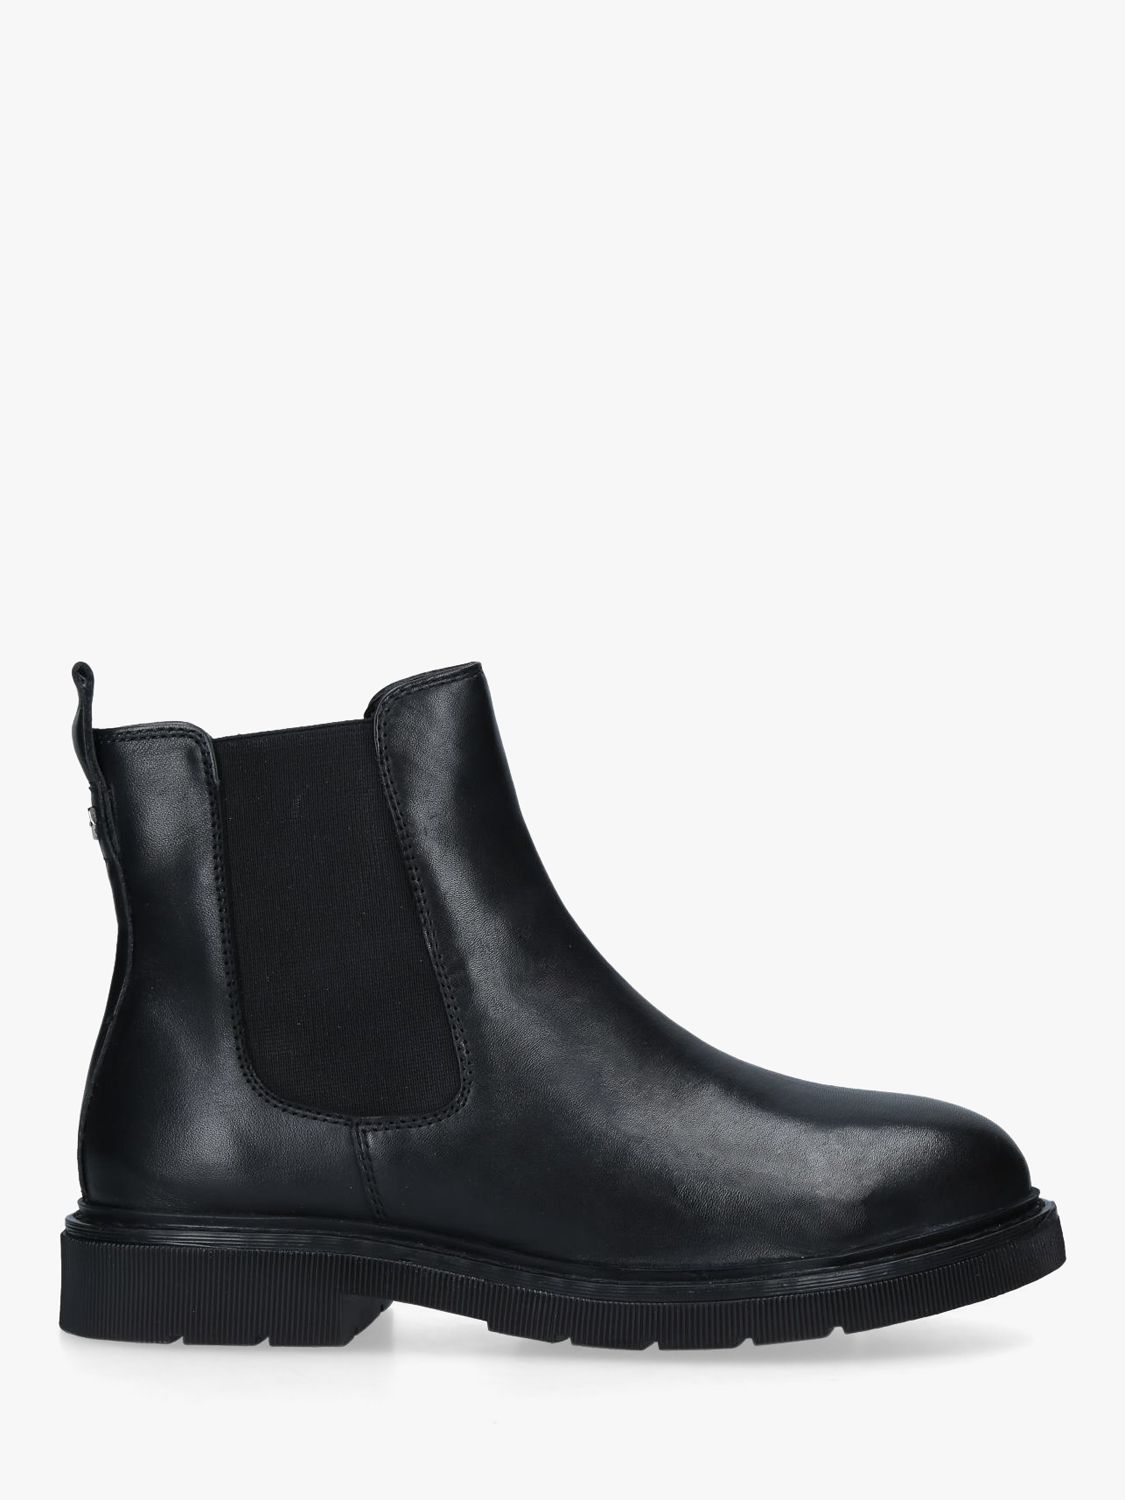 Carvela Strategy Leather Chelsea Boots, Black at John Lewis & Partners